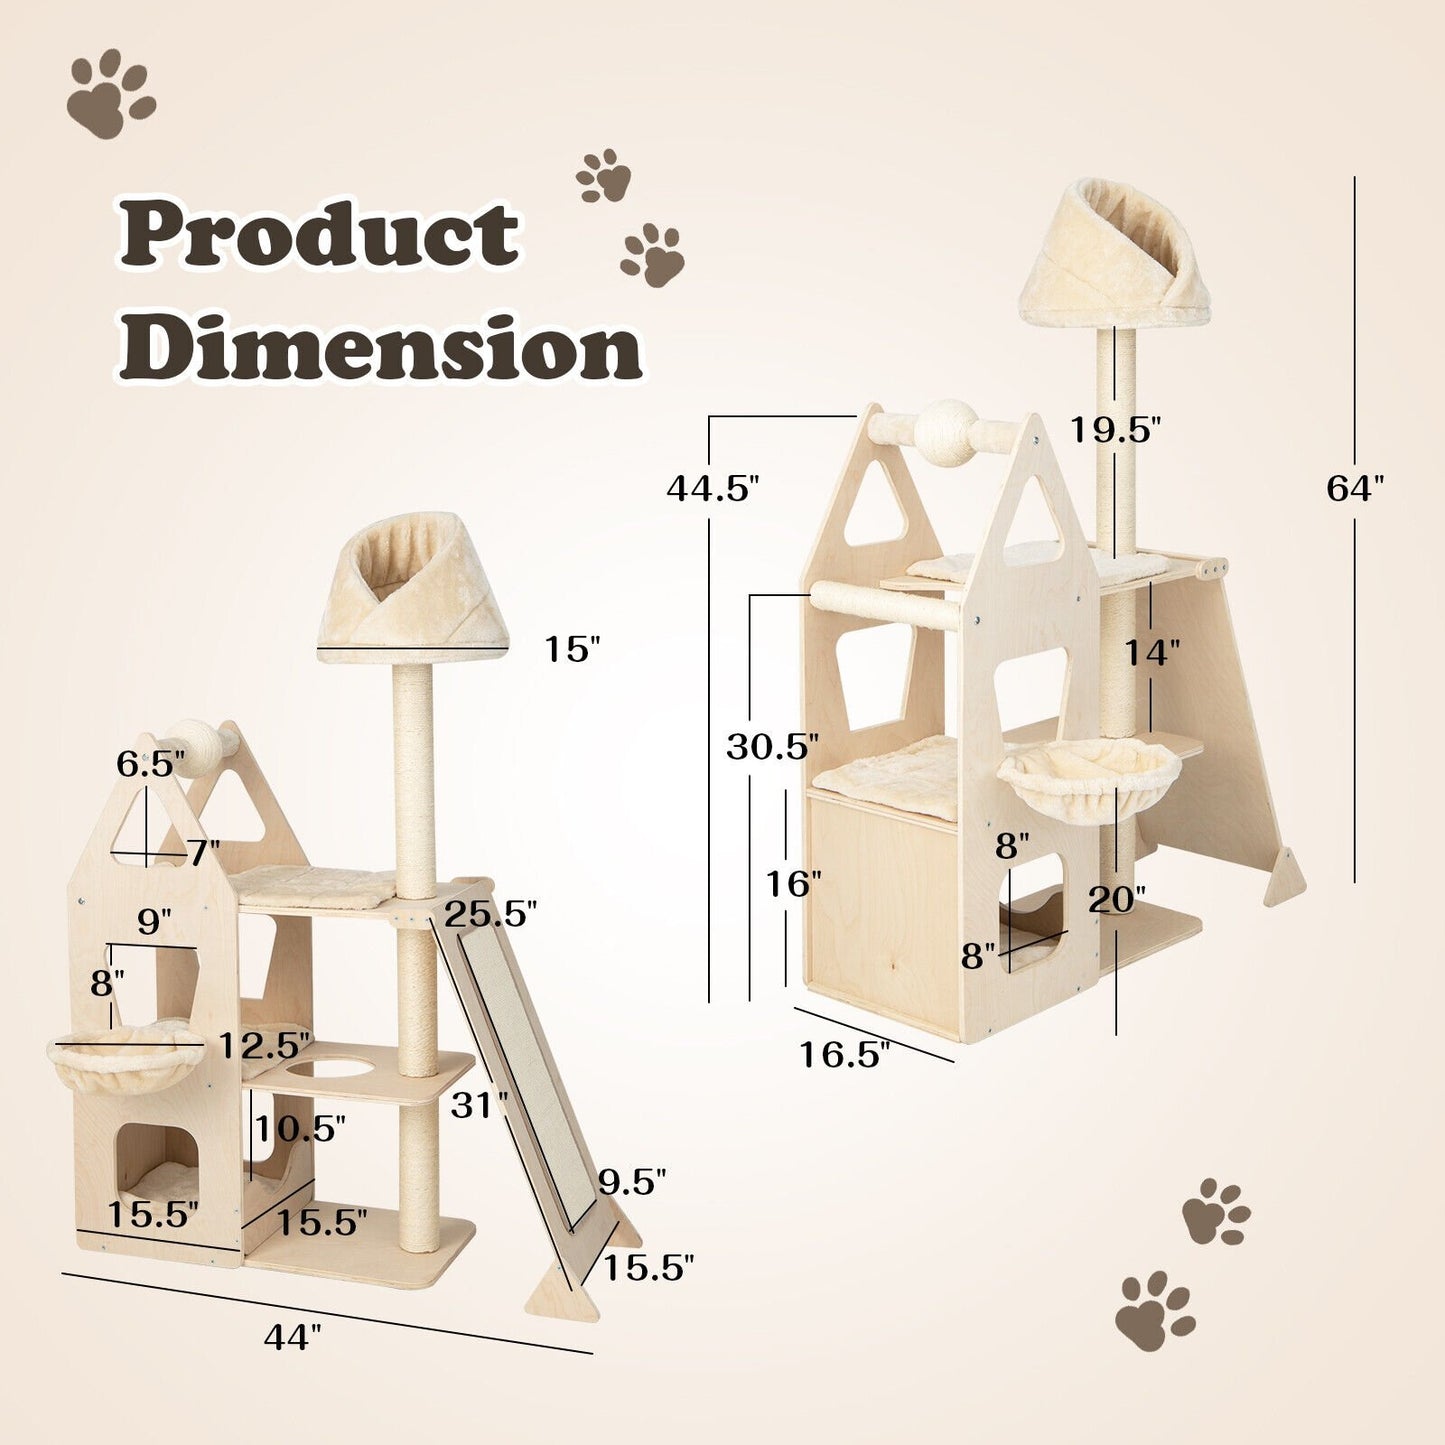 Multi-Level Cat Tree with Sisal Scratching Post, Beige at Gallery Canada